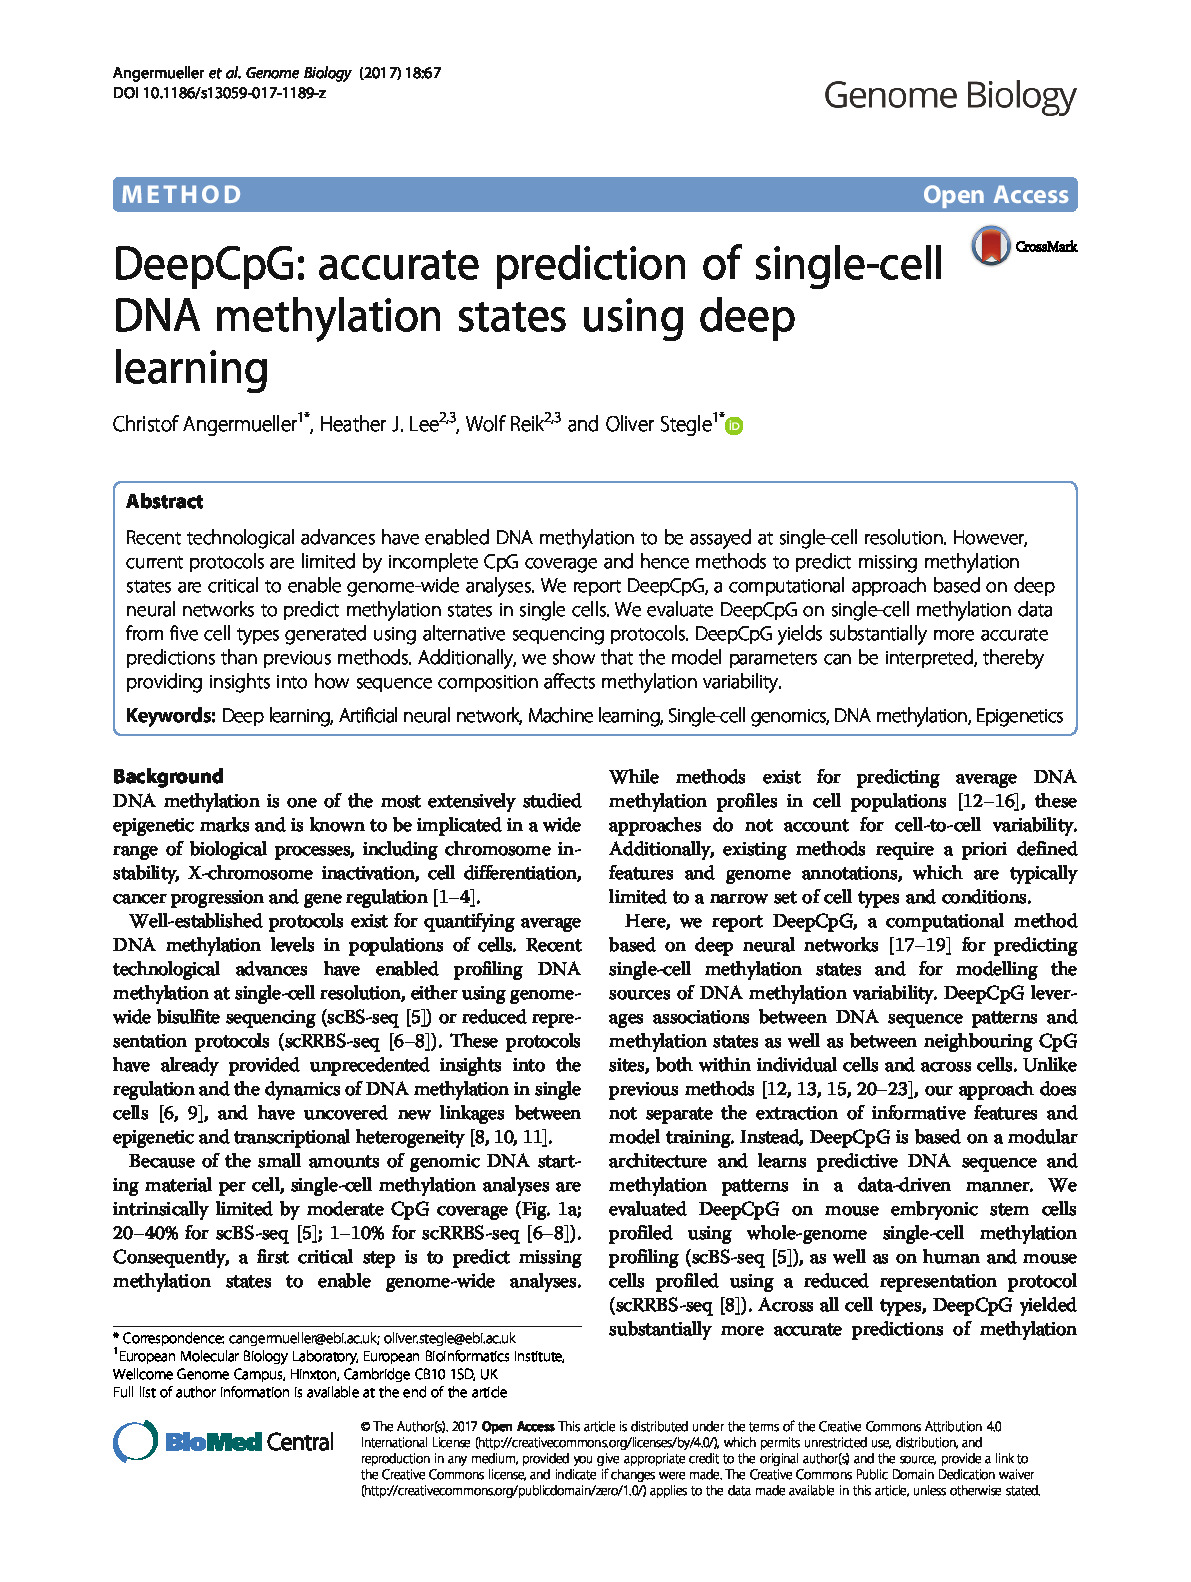 DeepCpG accurate prediction of single-cell DNA methylation states using deep learning